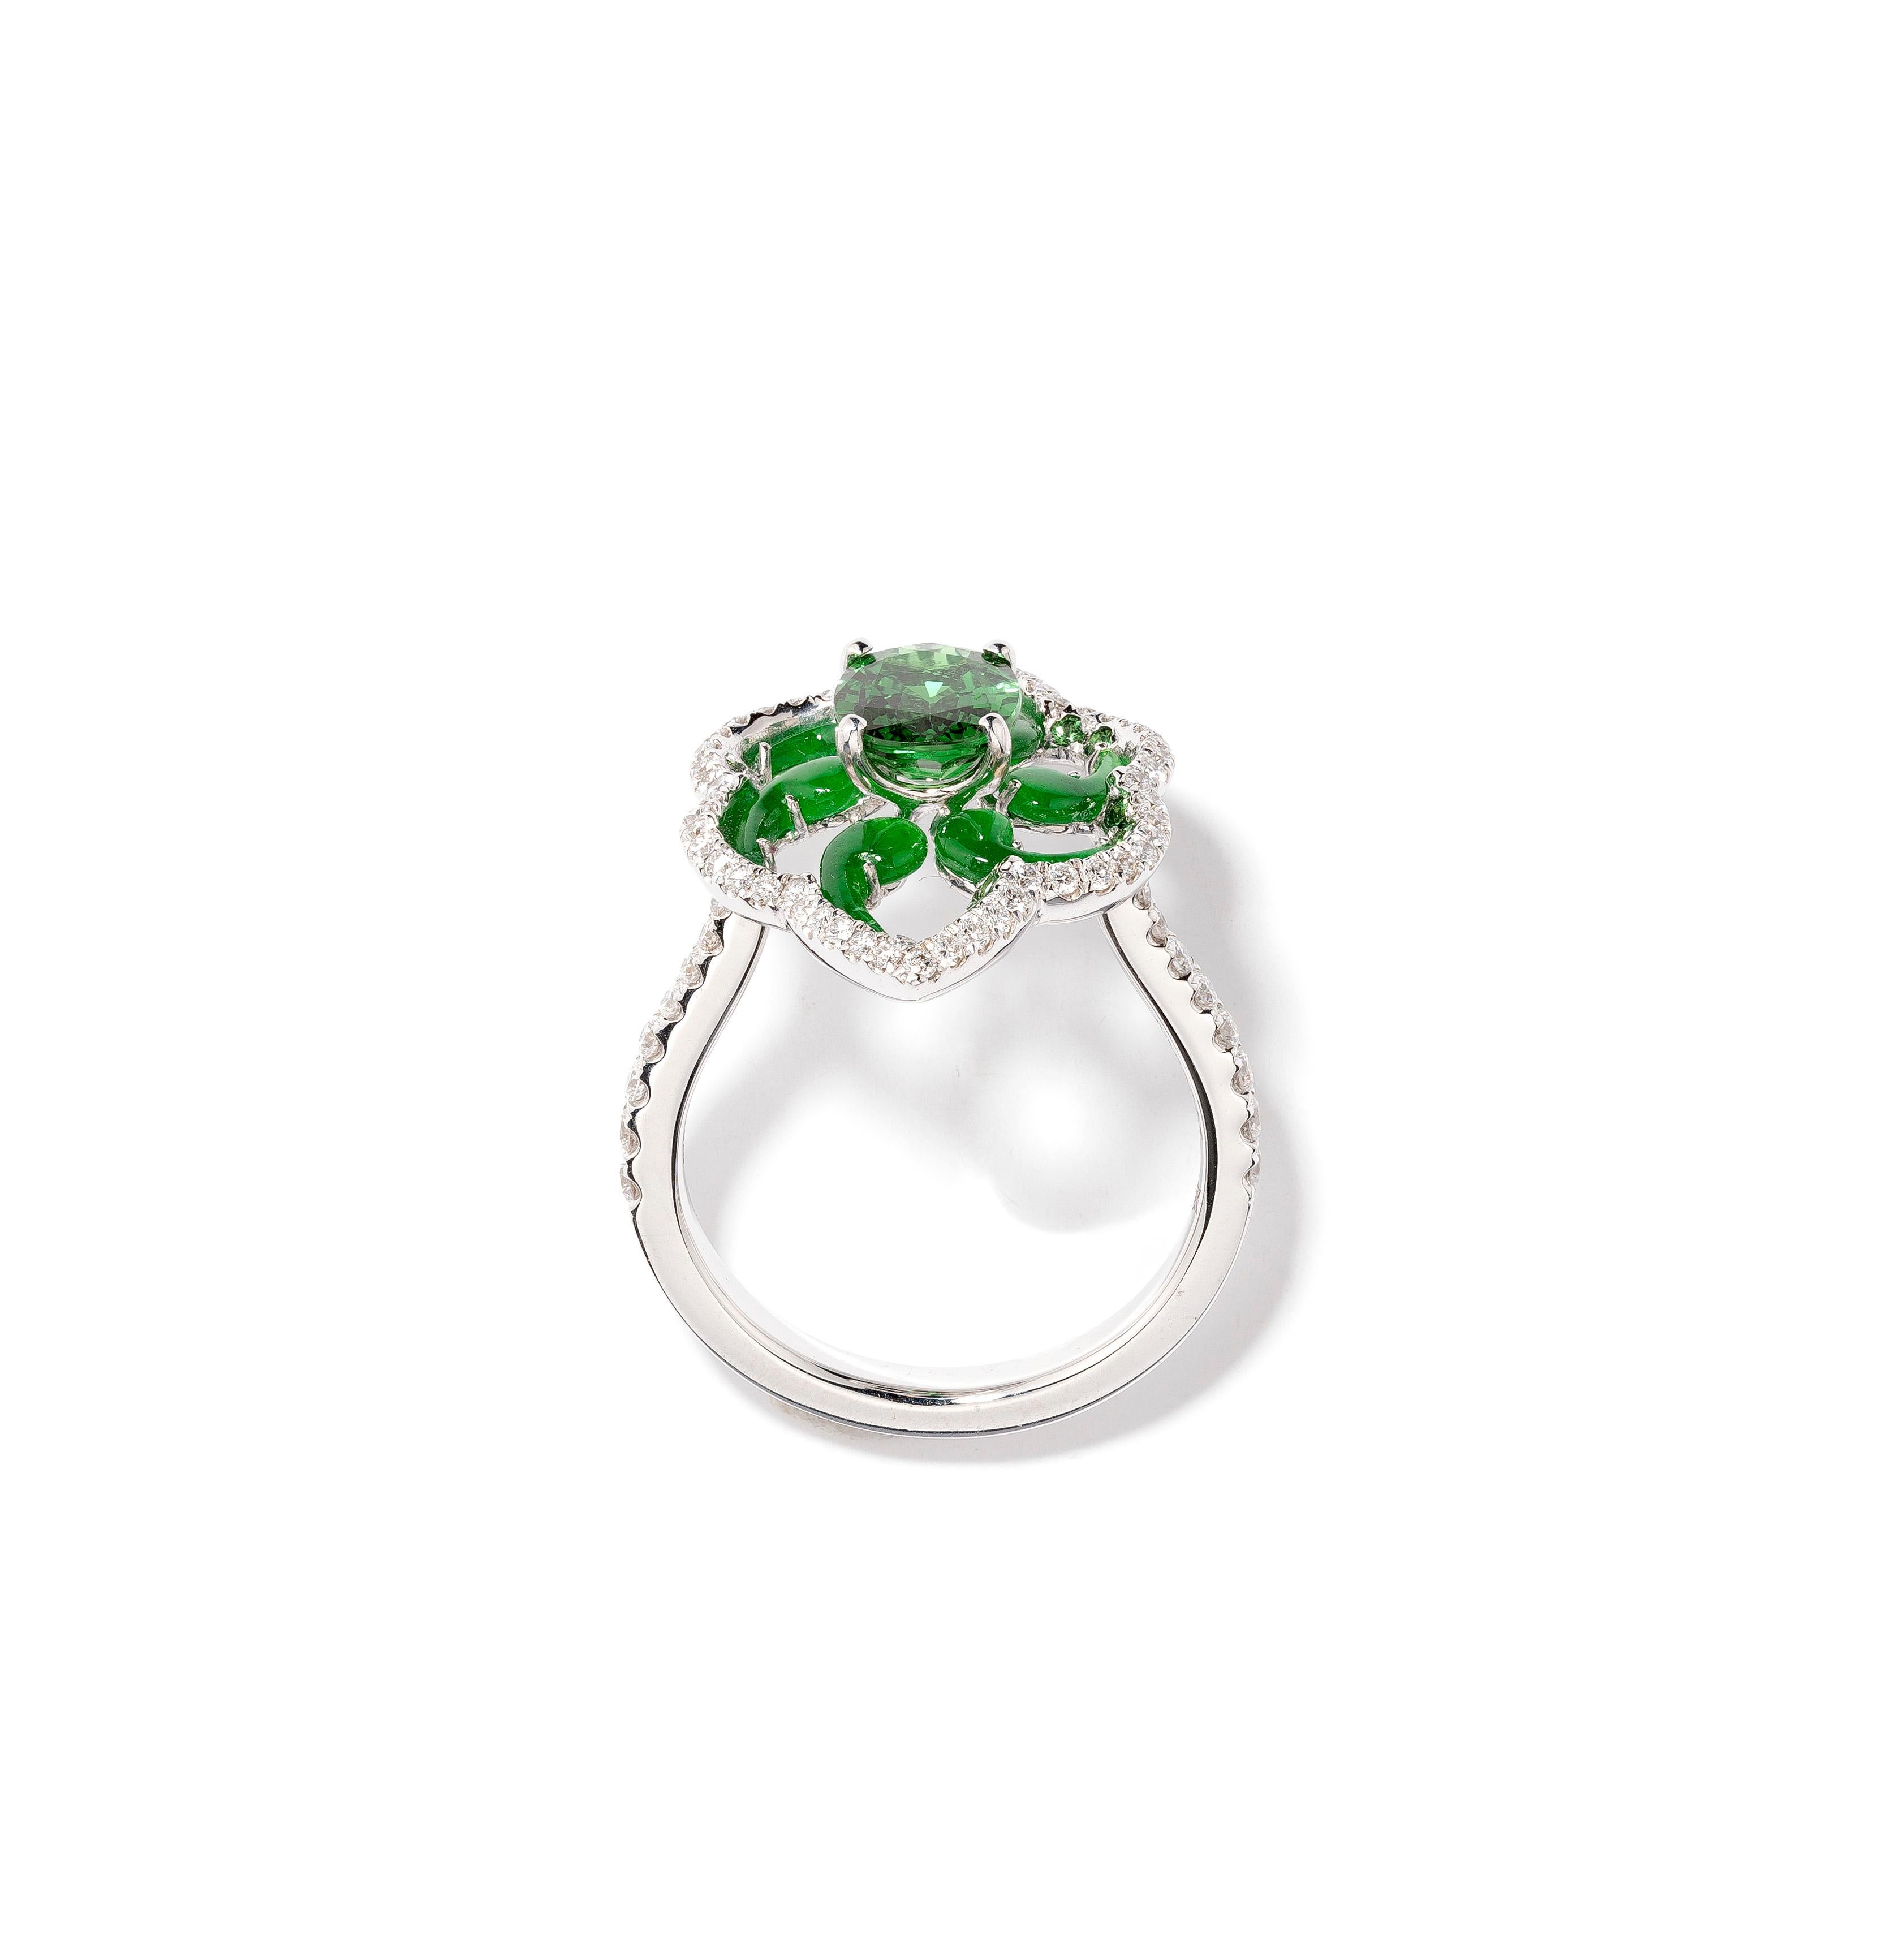 One ring made in white gold and set with tsavorite, jade and diamonds
1 oval shaped tsavorite weighing 1.17ct
16 tsavorites weighing 0.10cts
Finger size: 51mm